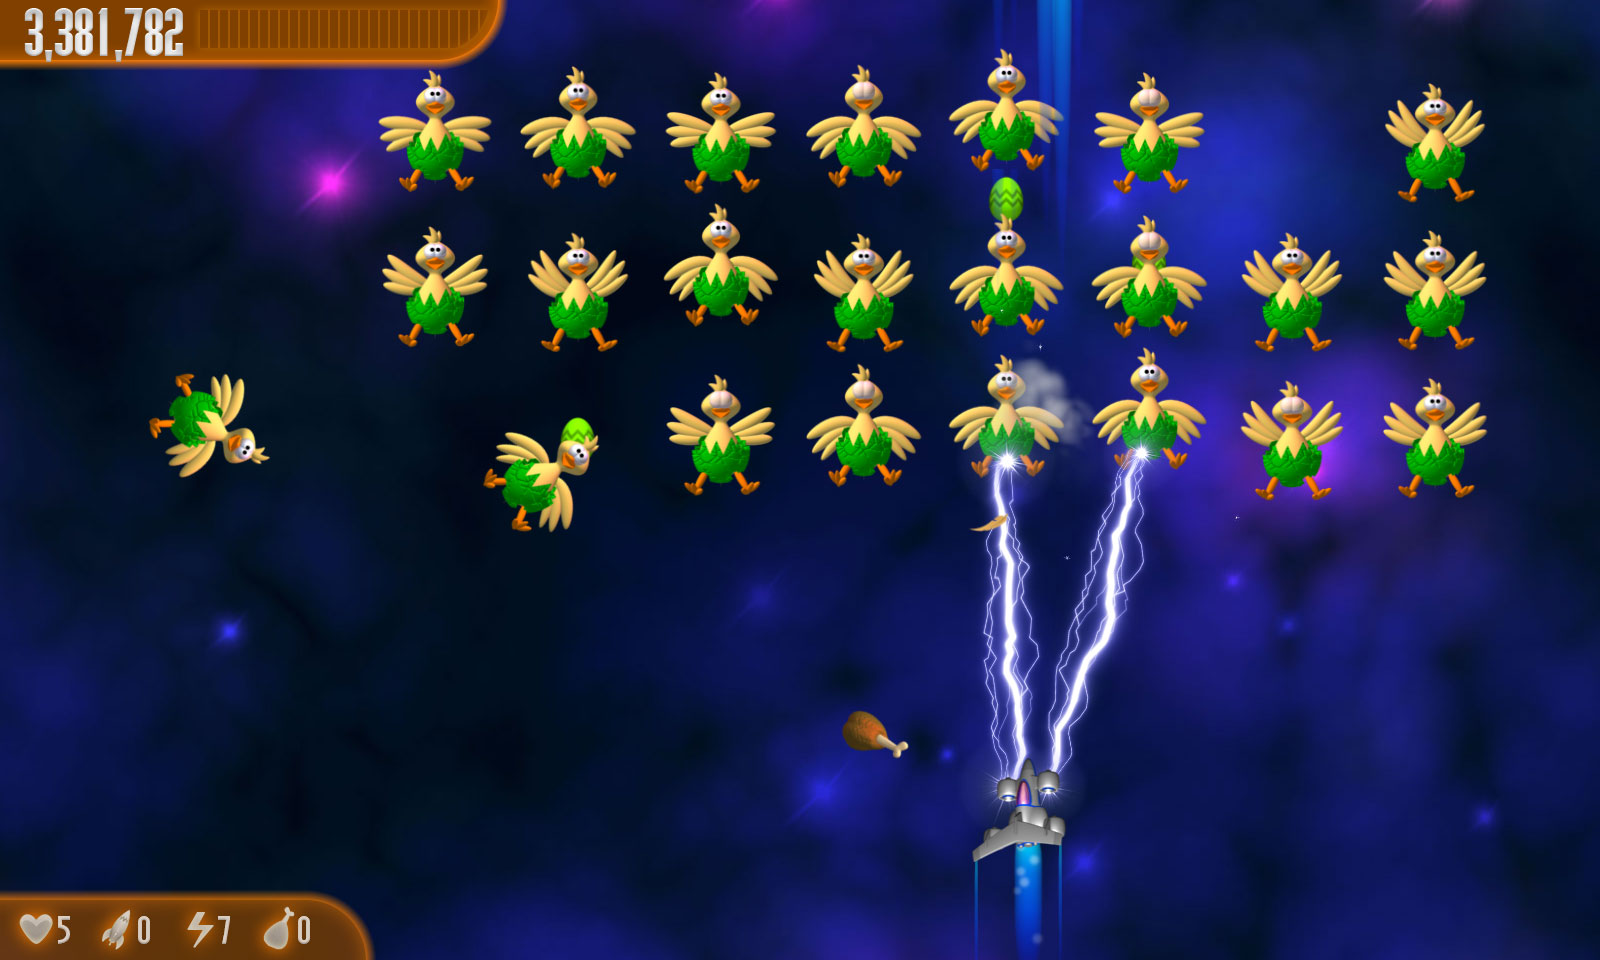 chicken invaders 3 full version free download for pc